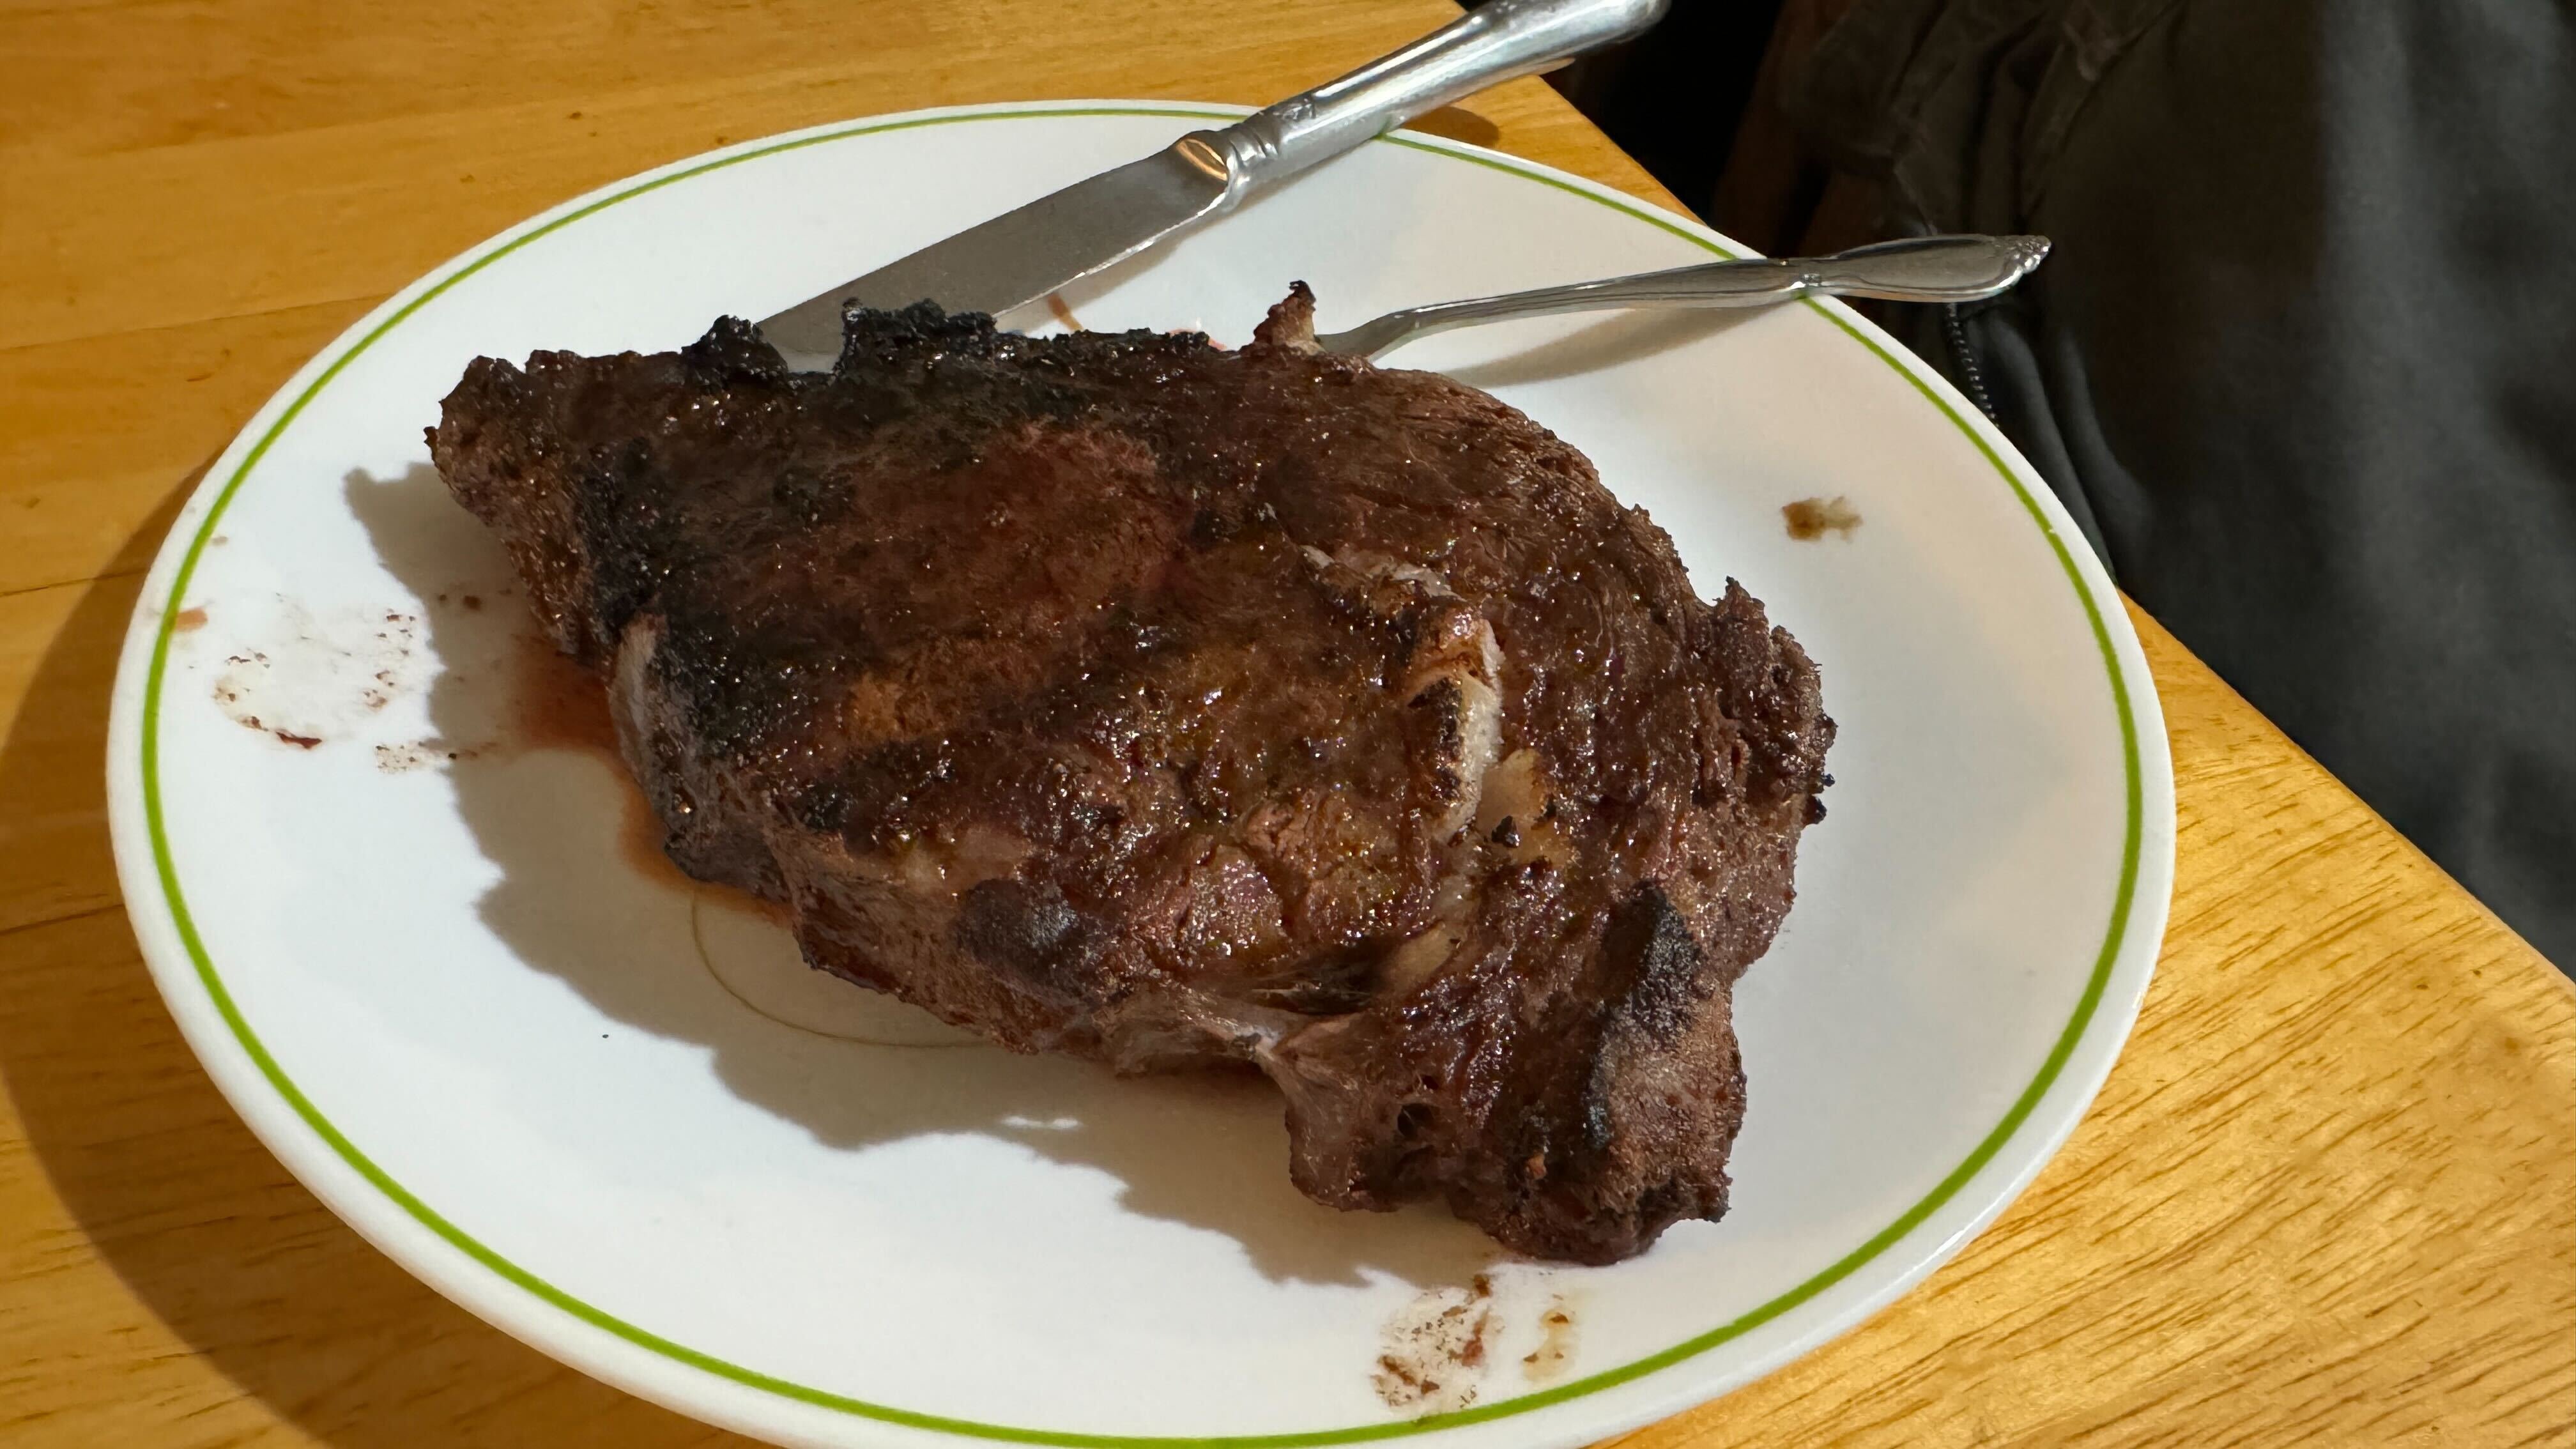 My steak, grilled to perfection thanks to Chef IQ probes